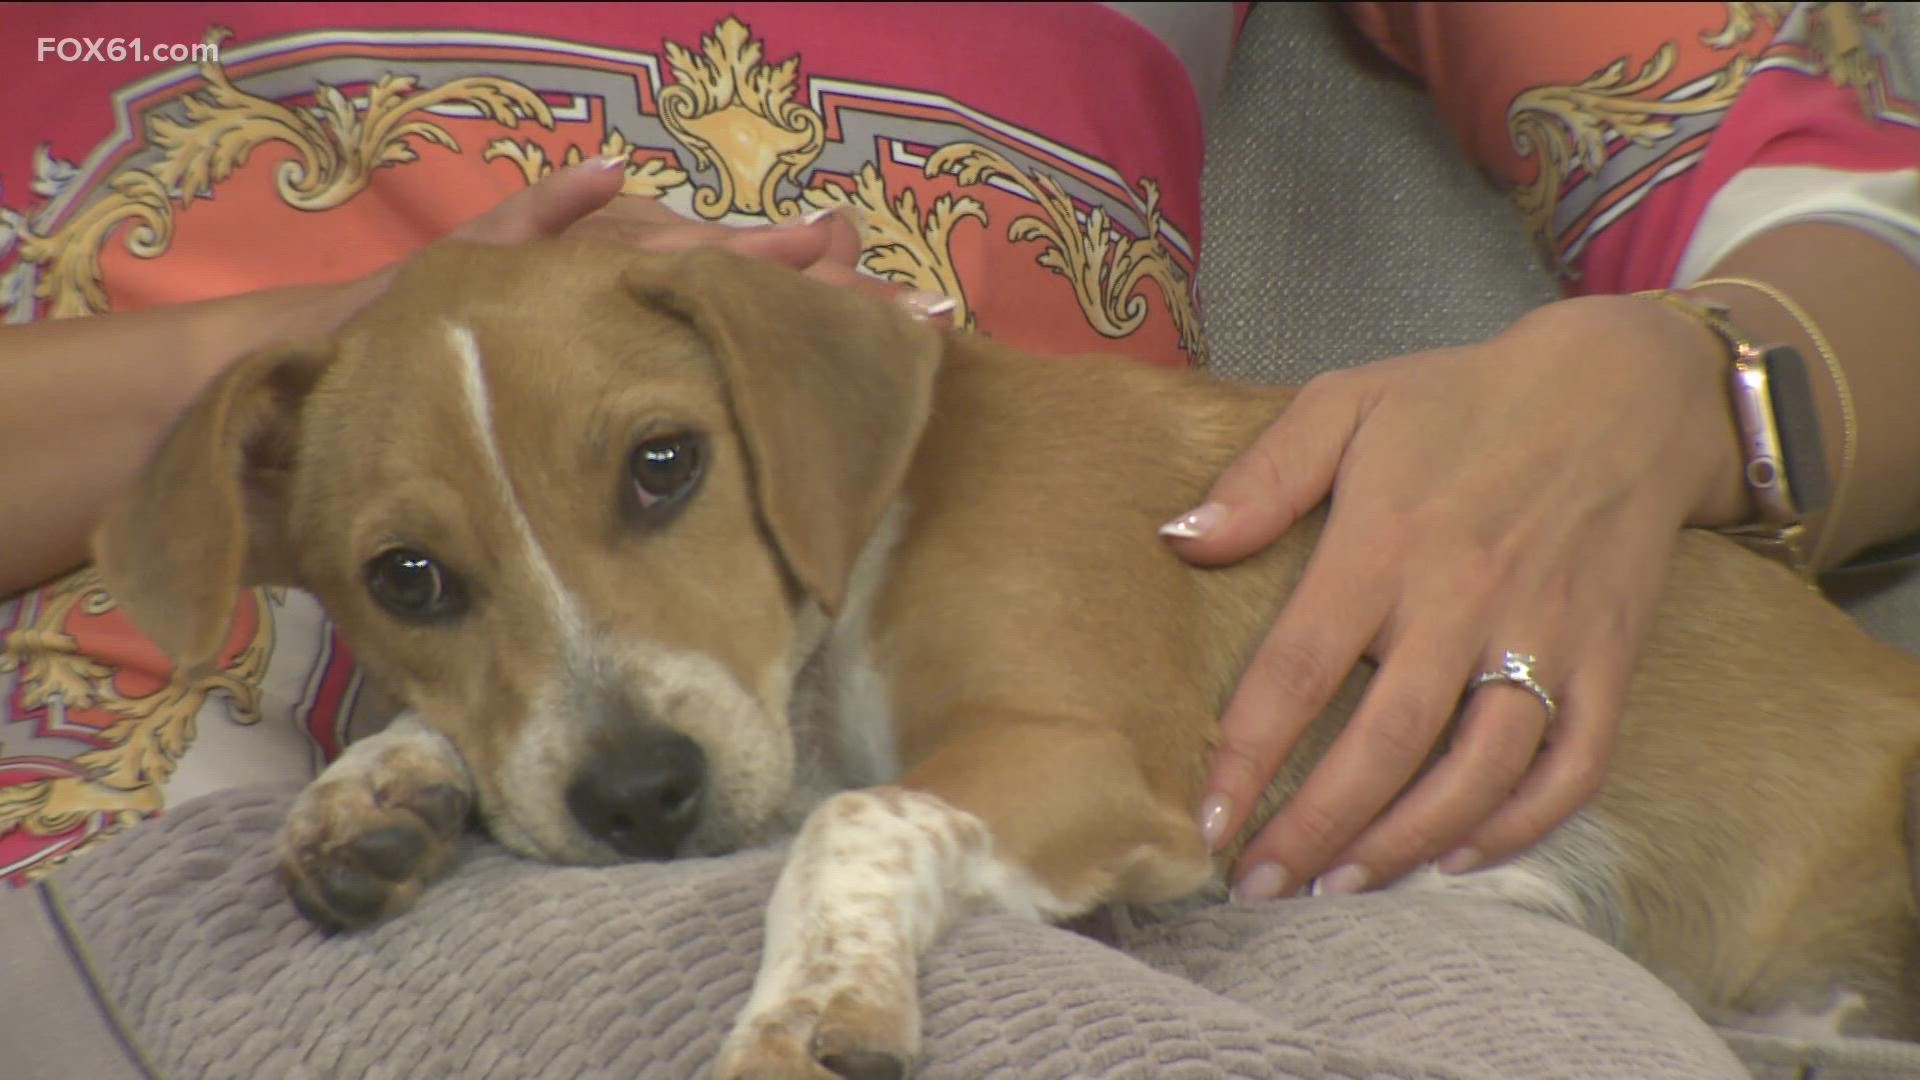 Rory is a 4-month-old hound mix. He is a sweet, playful puppy up for adoption at the Connecticut Humane Society.